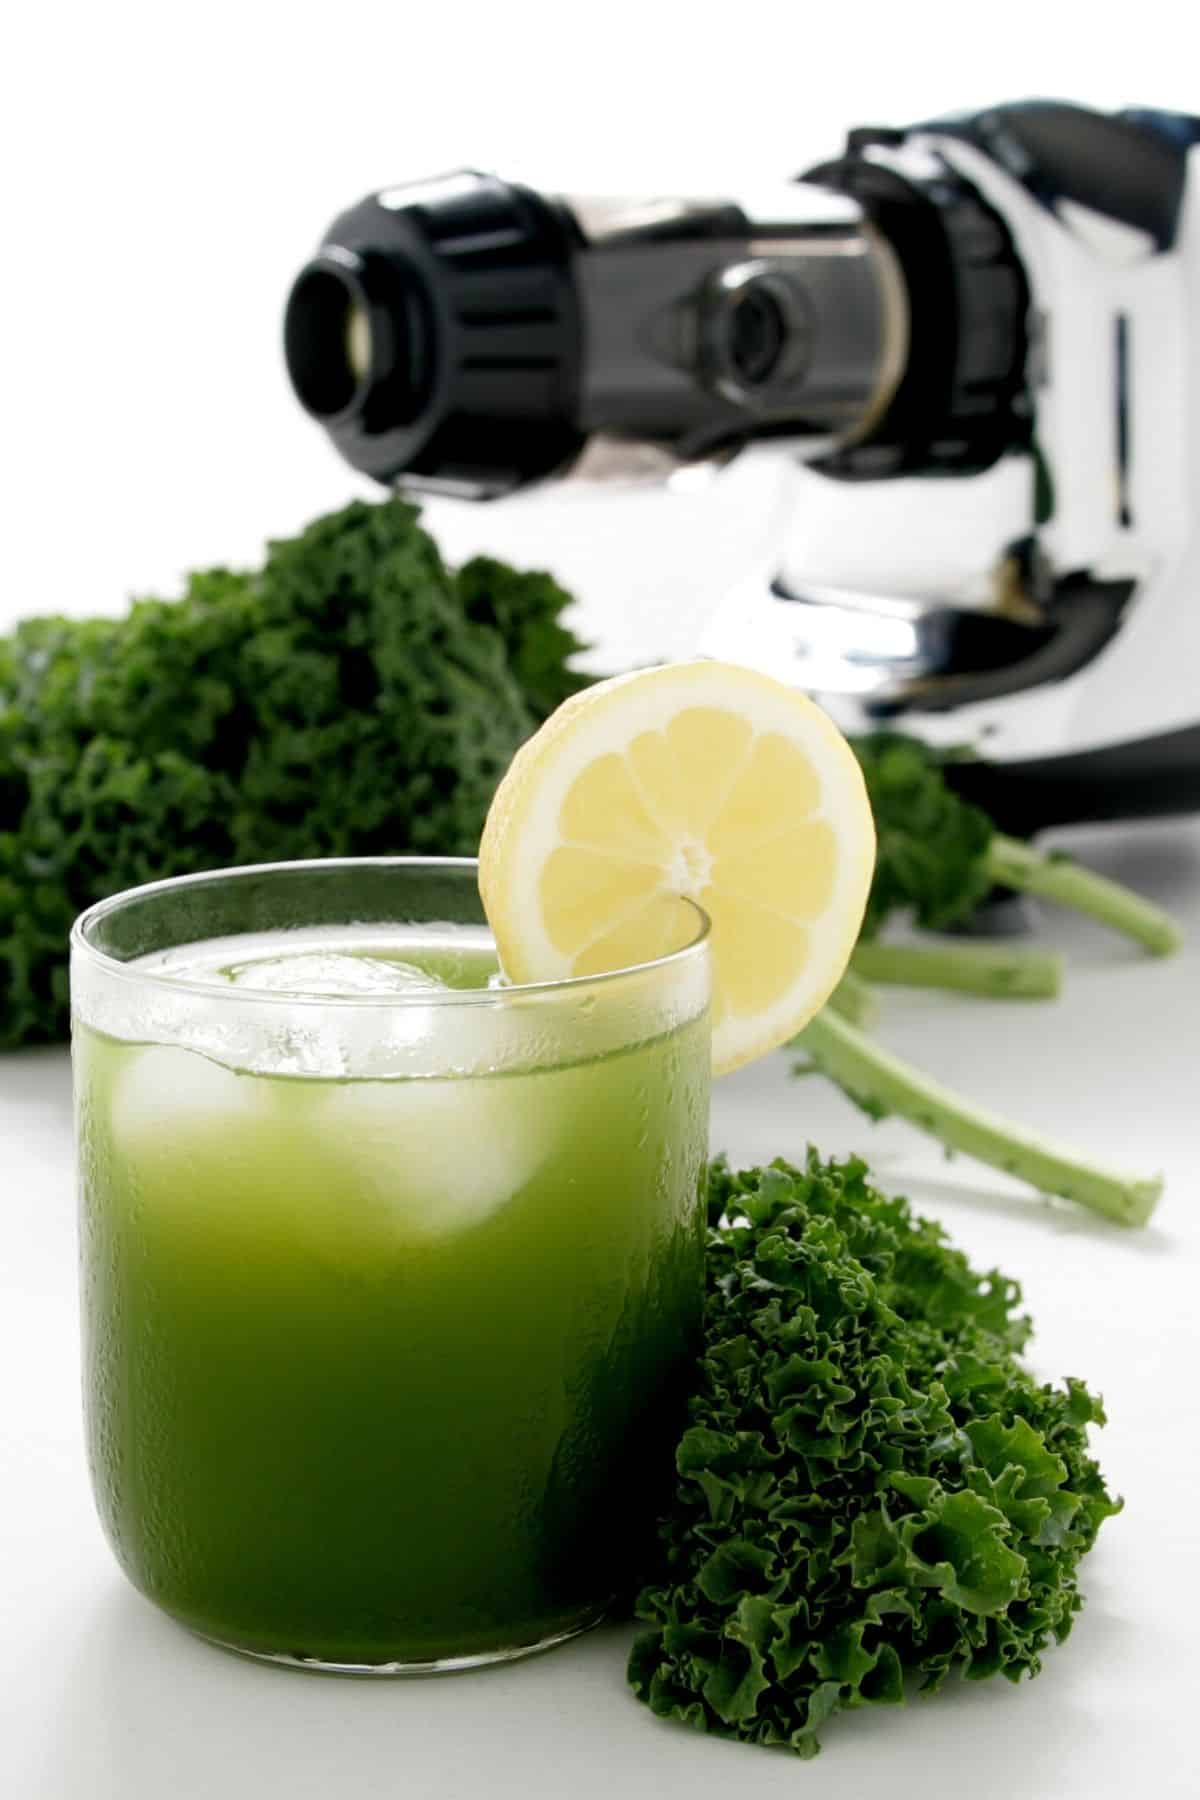 green juice in a glass with ice and lemon.